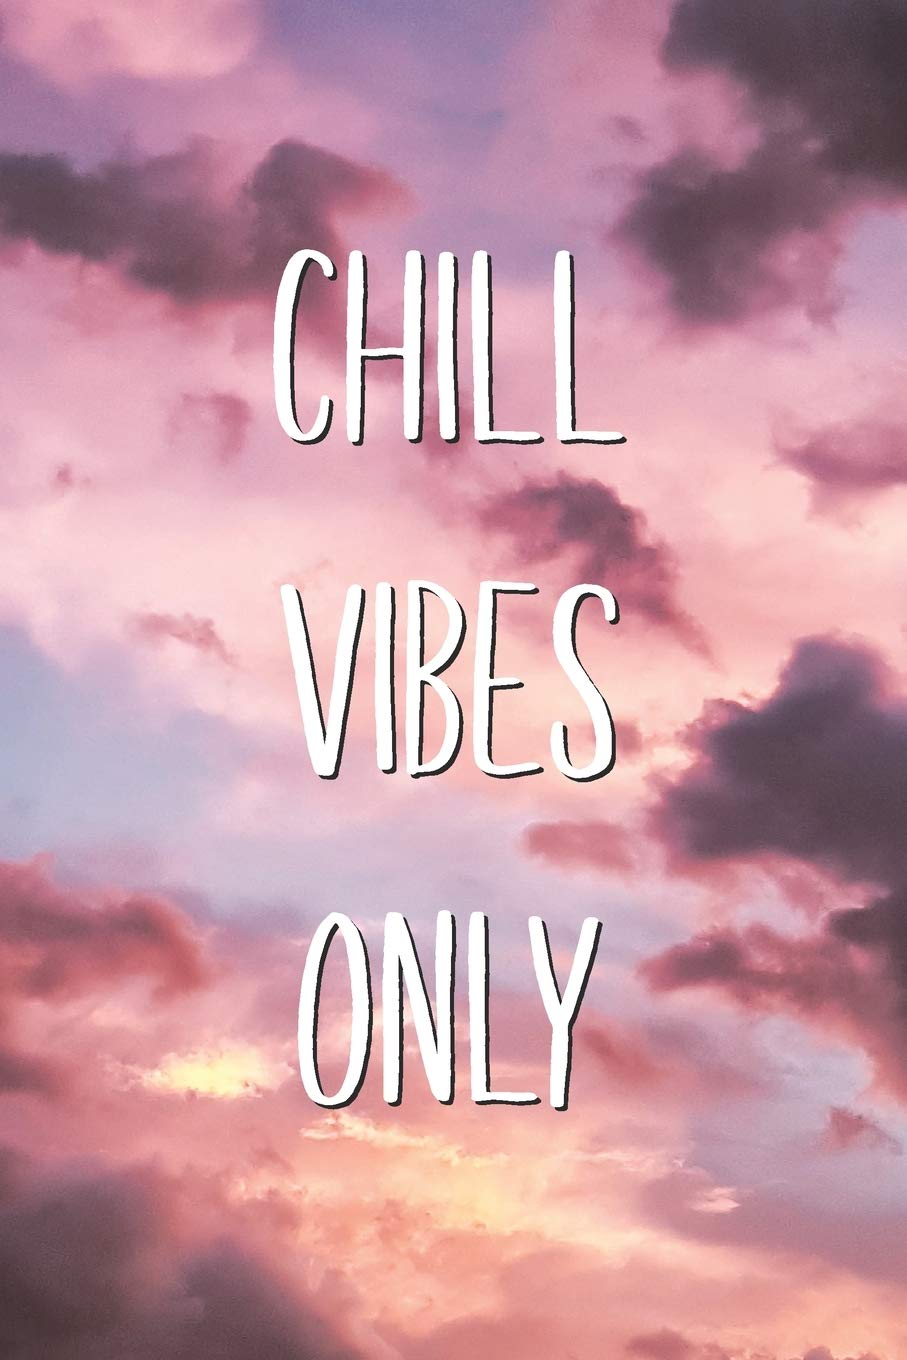 50 Chill Vibes Quotes, Sayings, And Captions